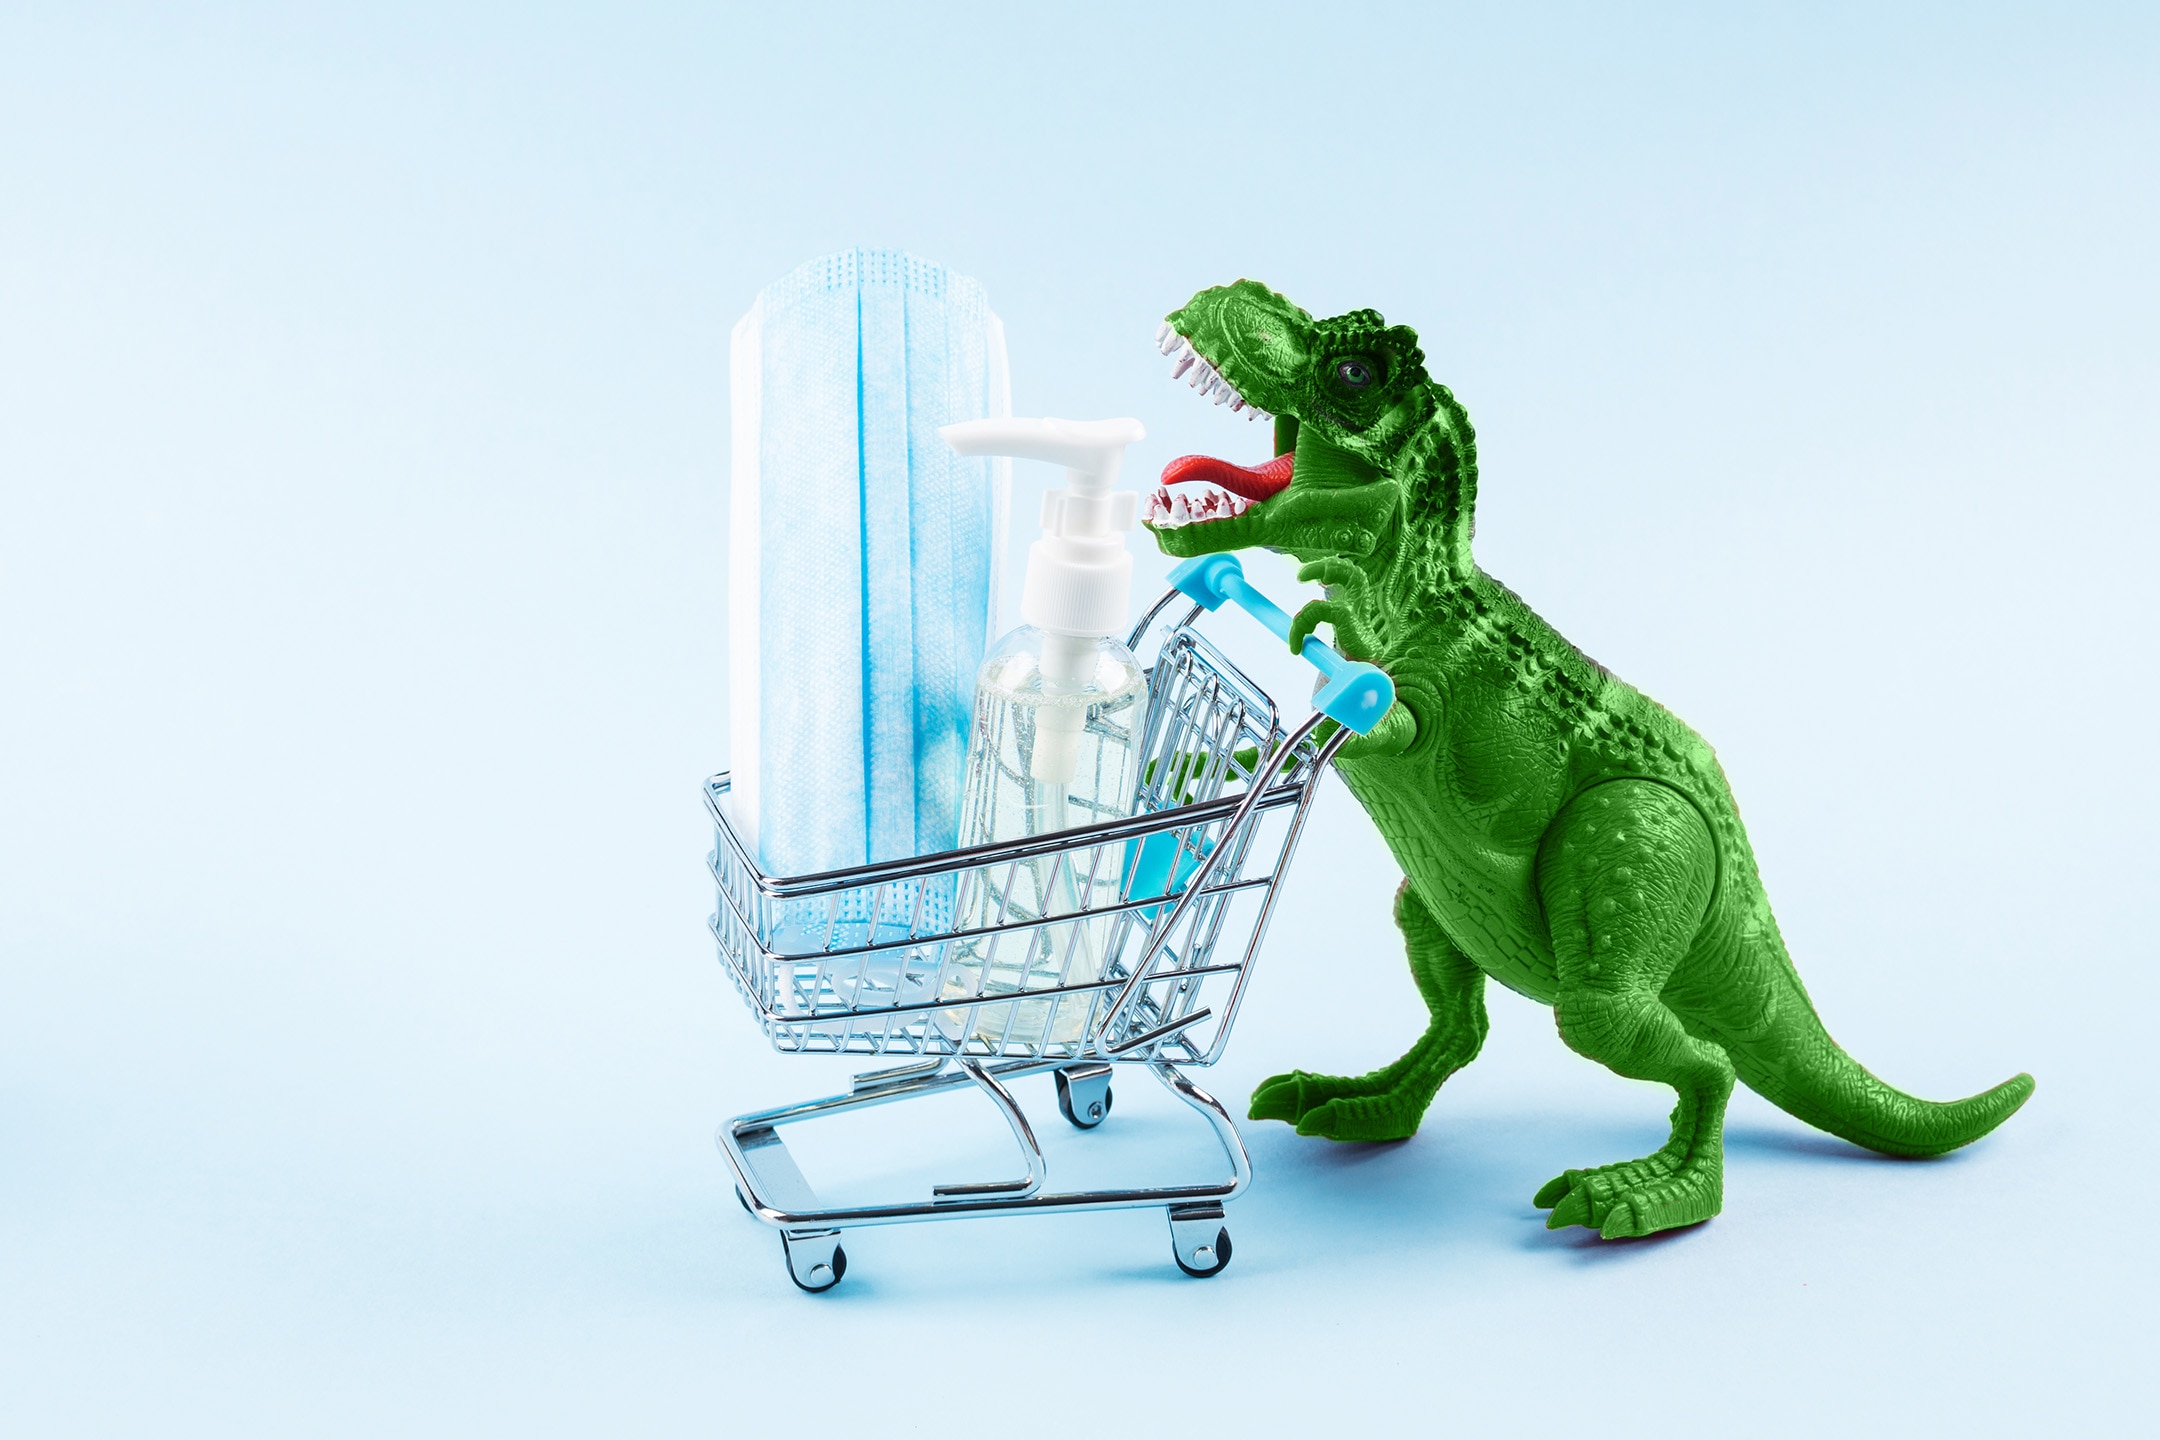 Green toy dinosaur pushing shopping cart containing hand sanitizer and face mask